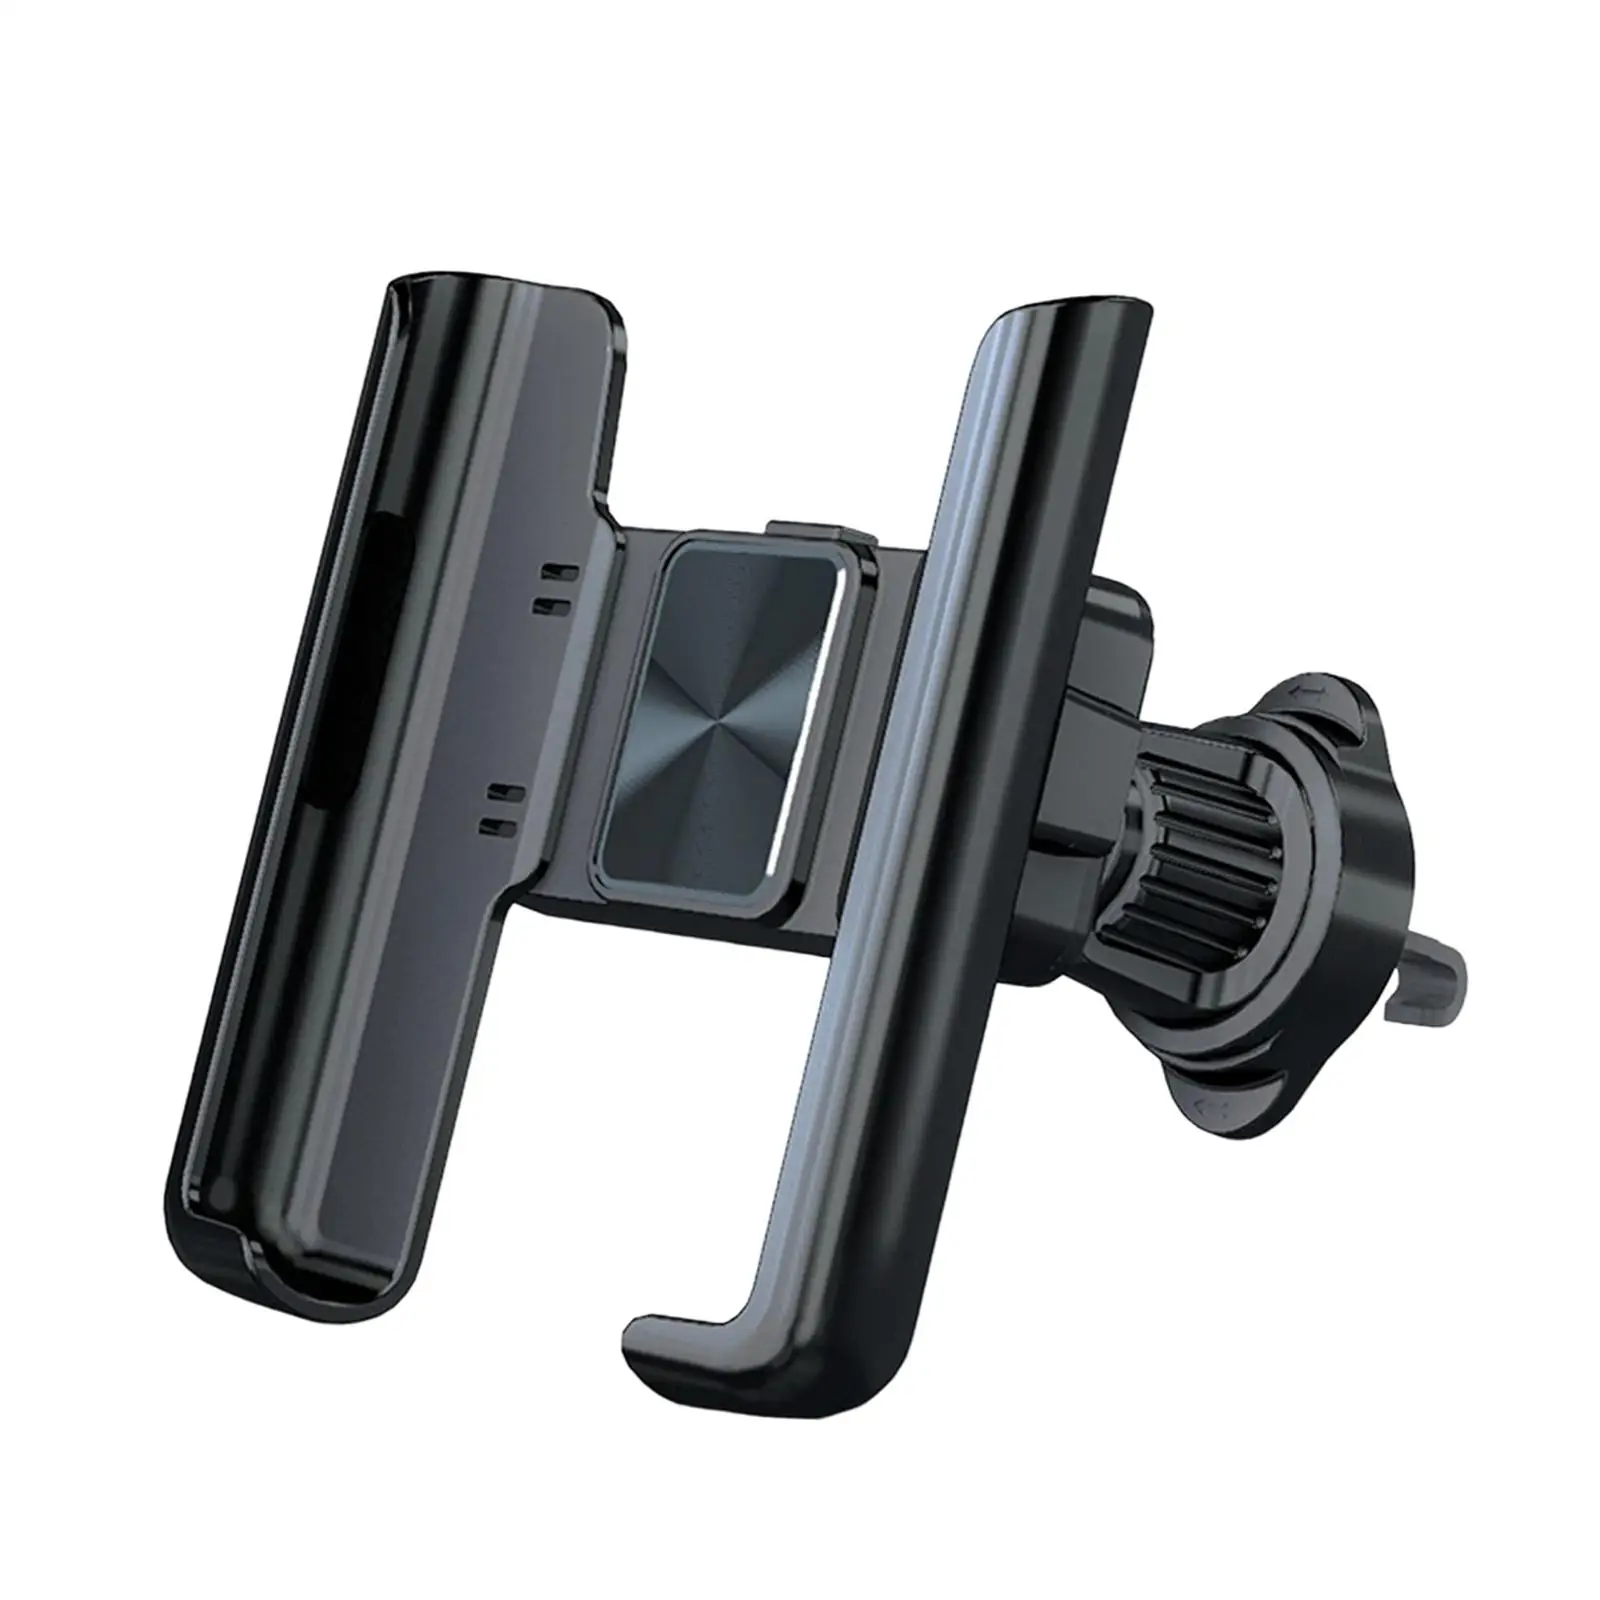 Air Vent Telescopic Hook Car Phone Holder Mount Support Bracket for Most Phones for Trucks